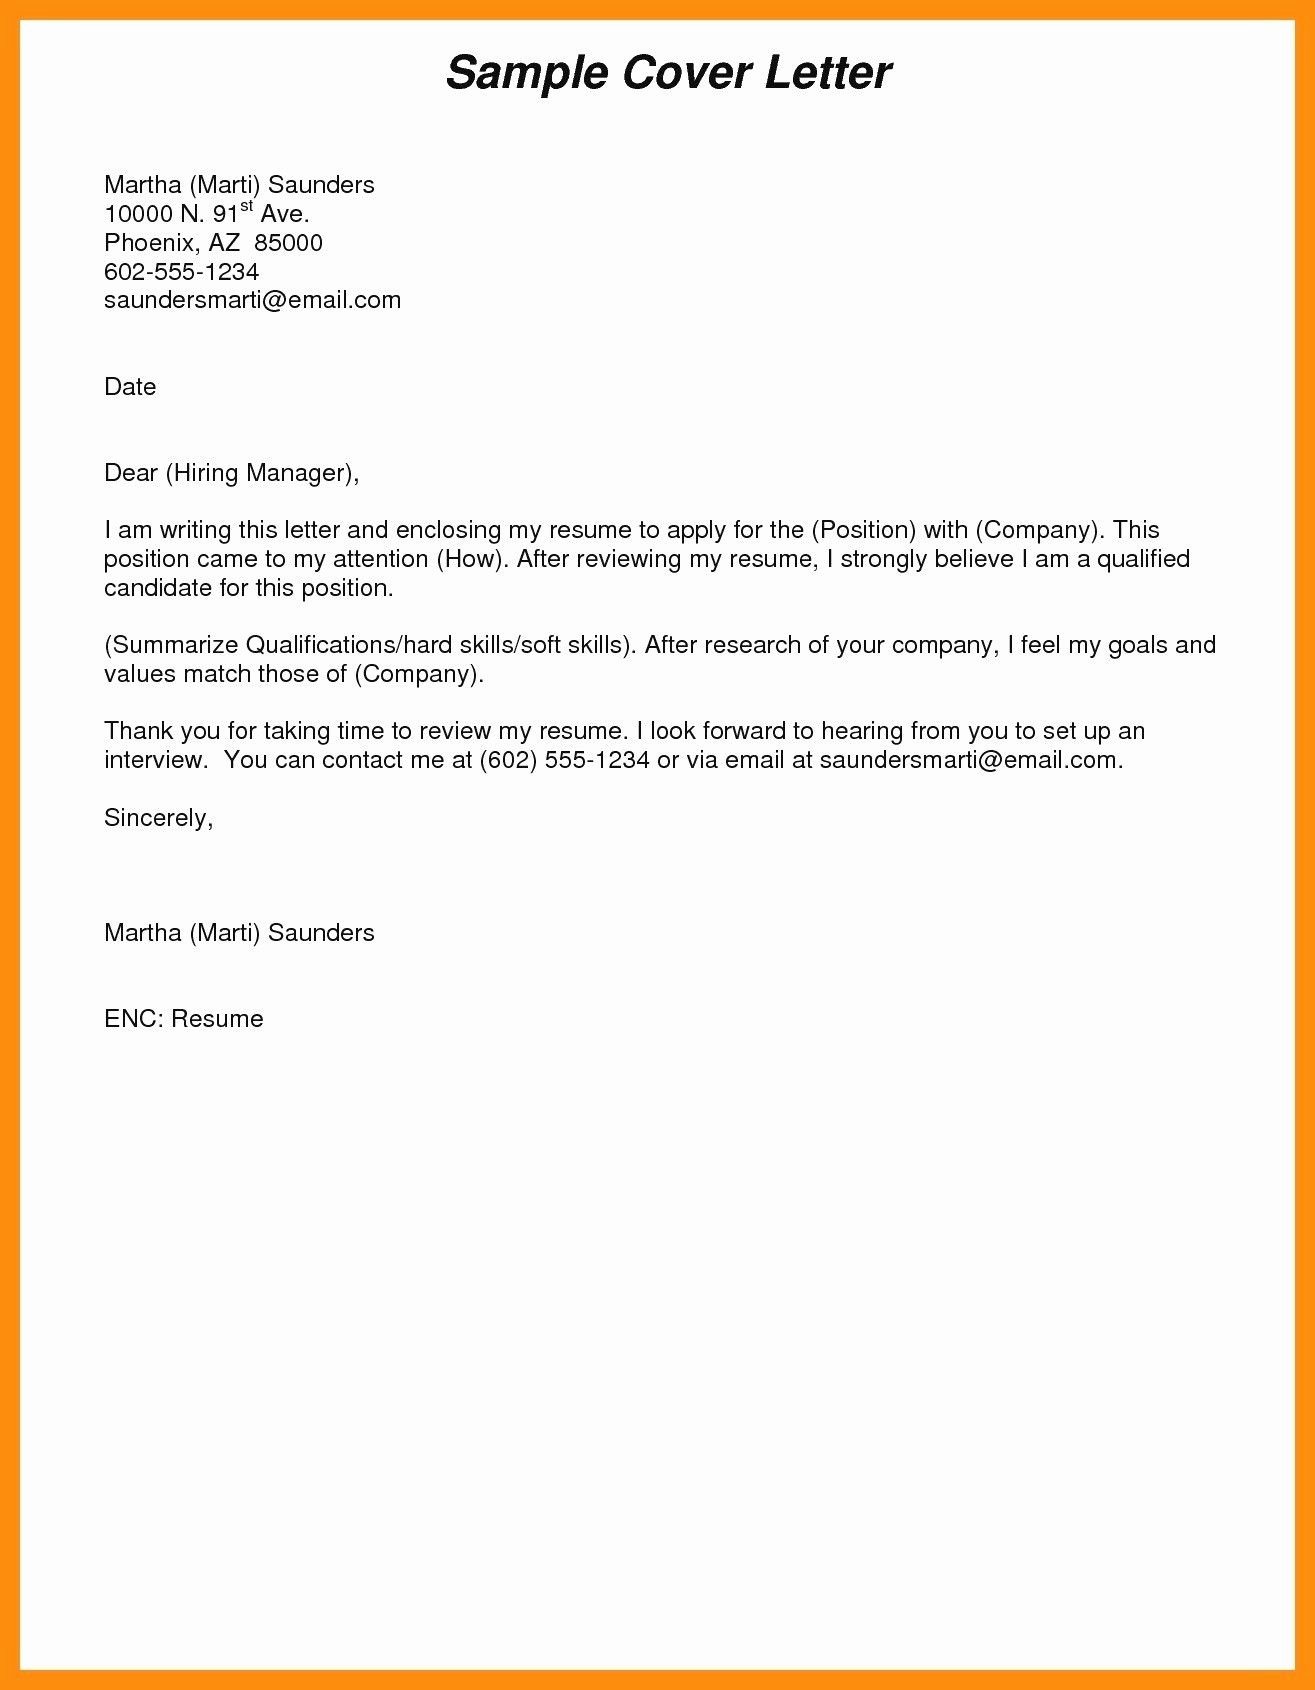 Emailed Cover Letter format Lovely 25 Email Cover Letter